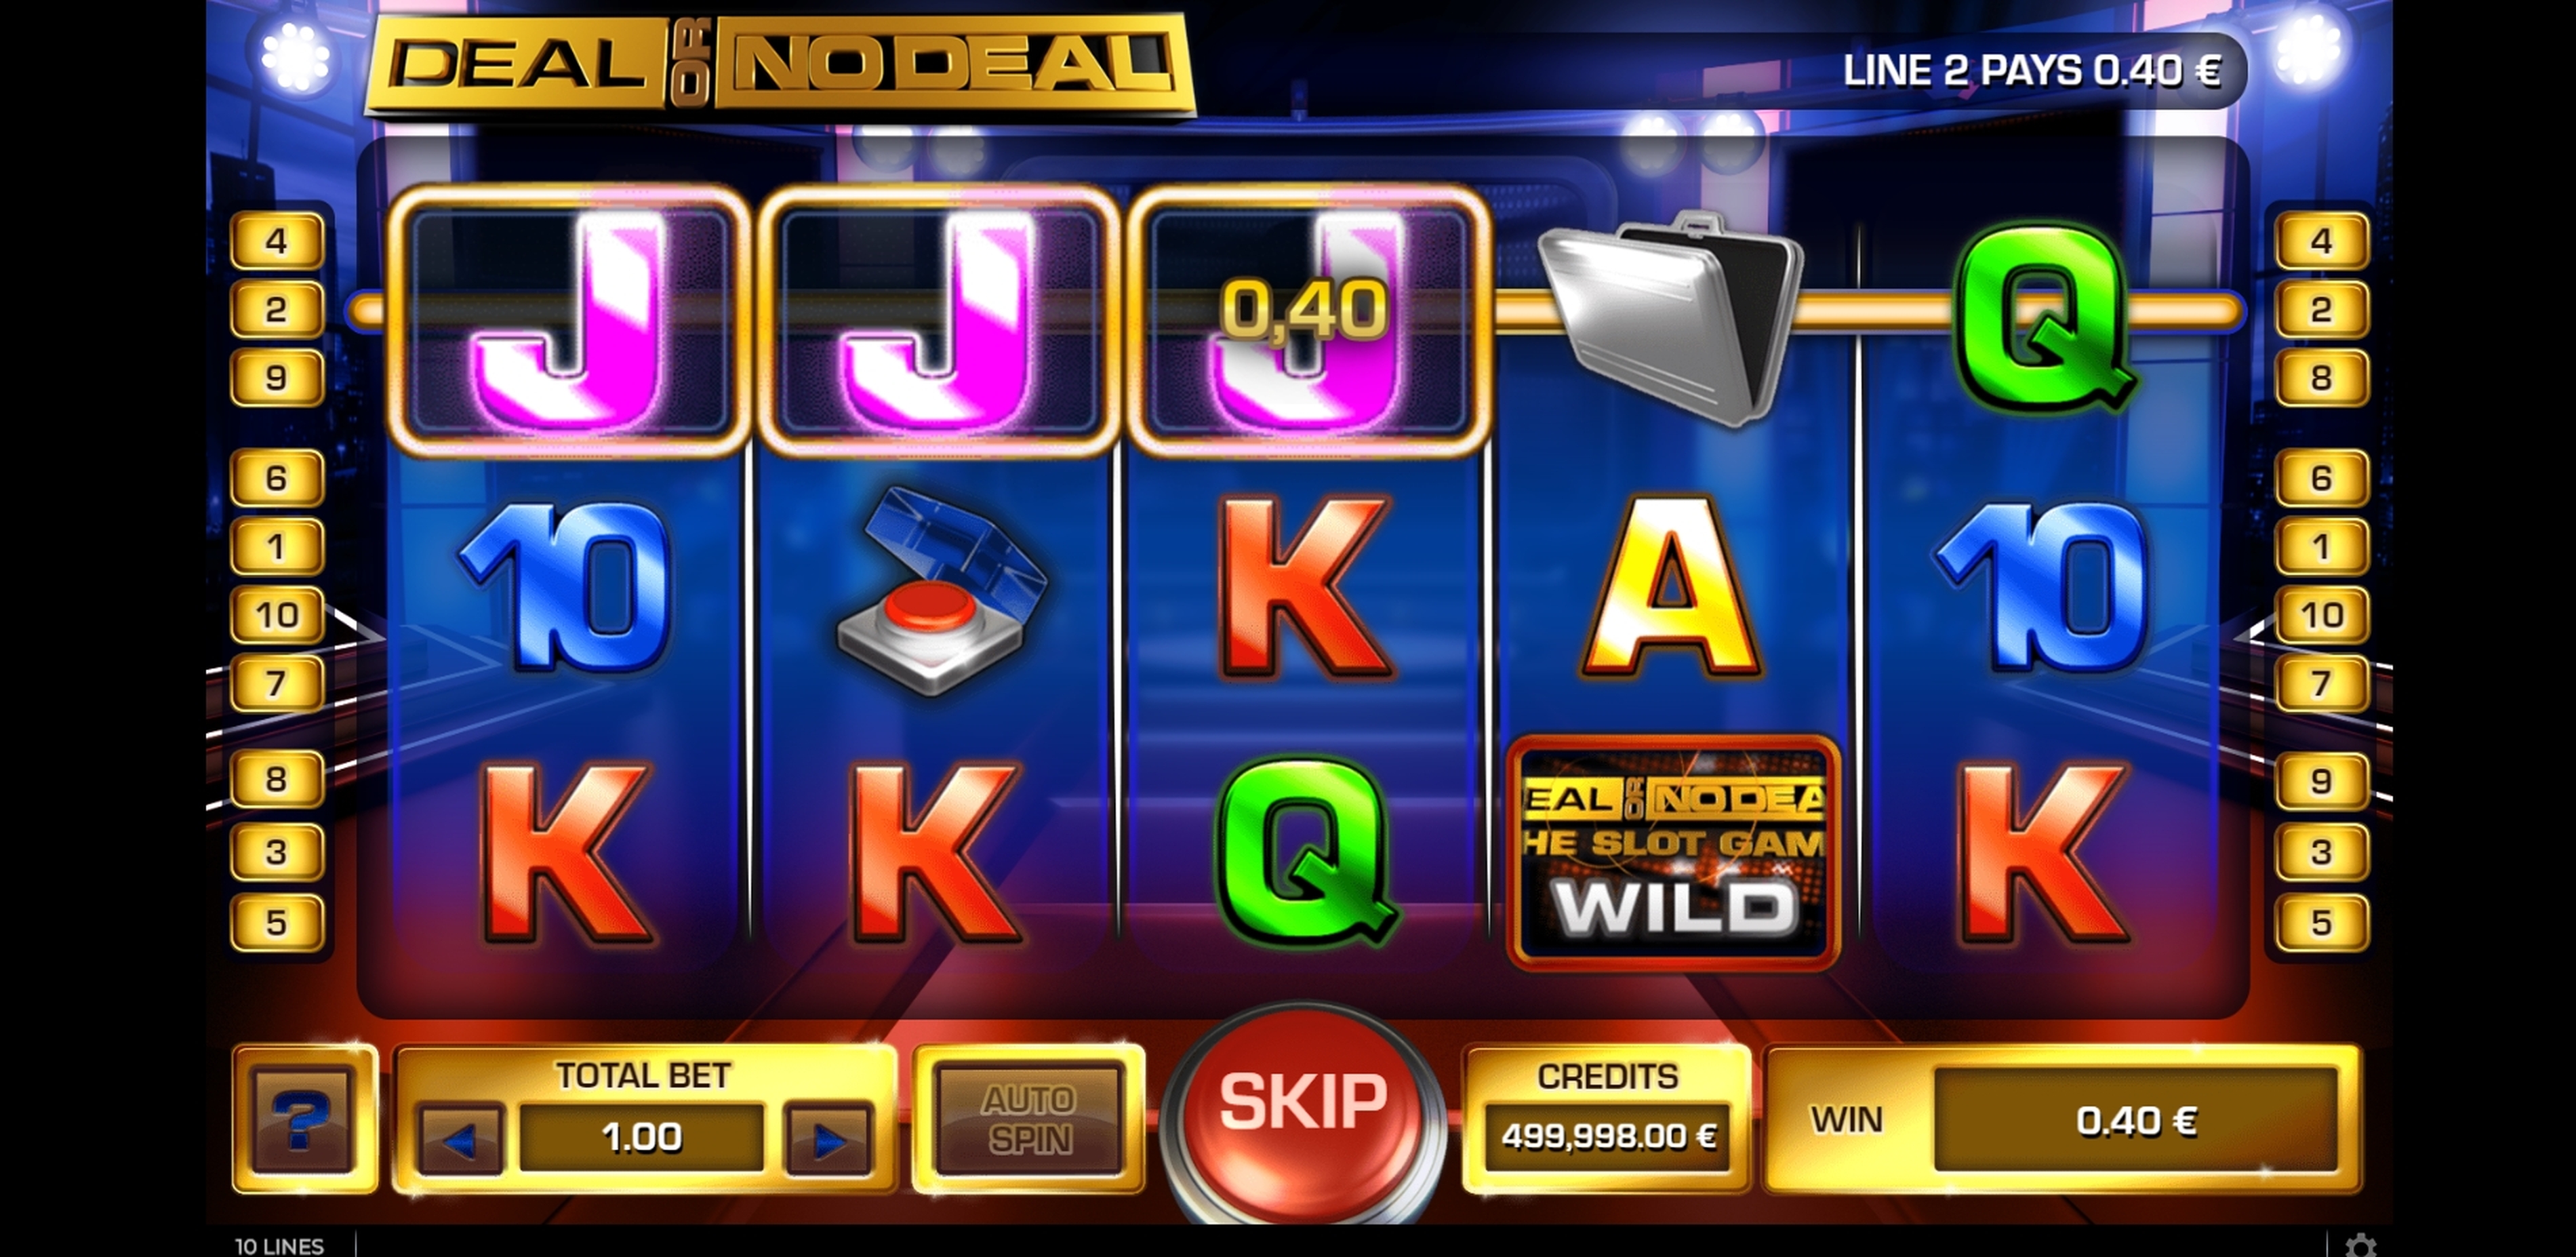 Win Money in Deal or No Deal The Slot Game Free Slot Game by GAMING1